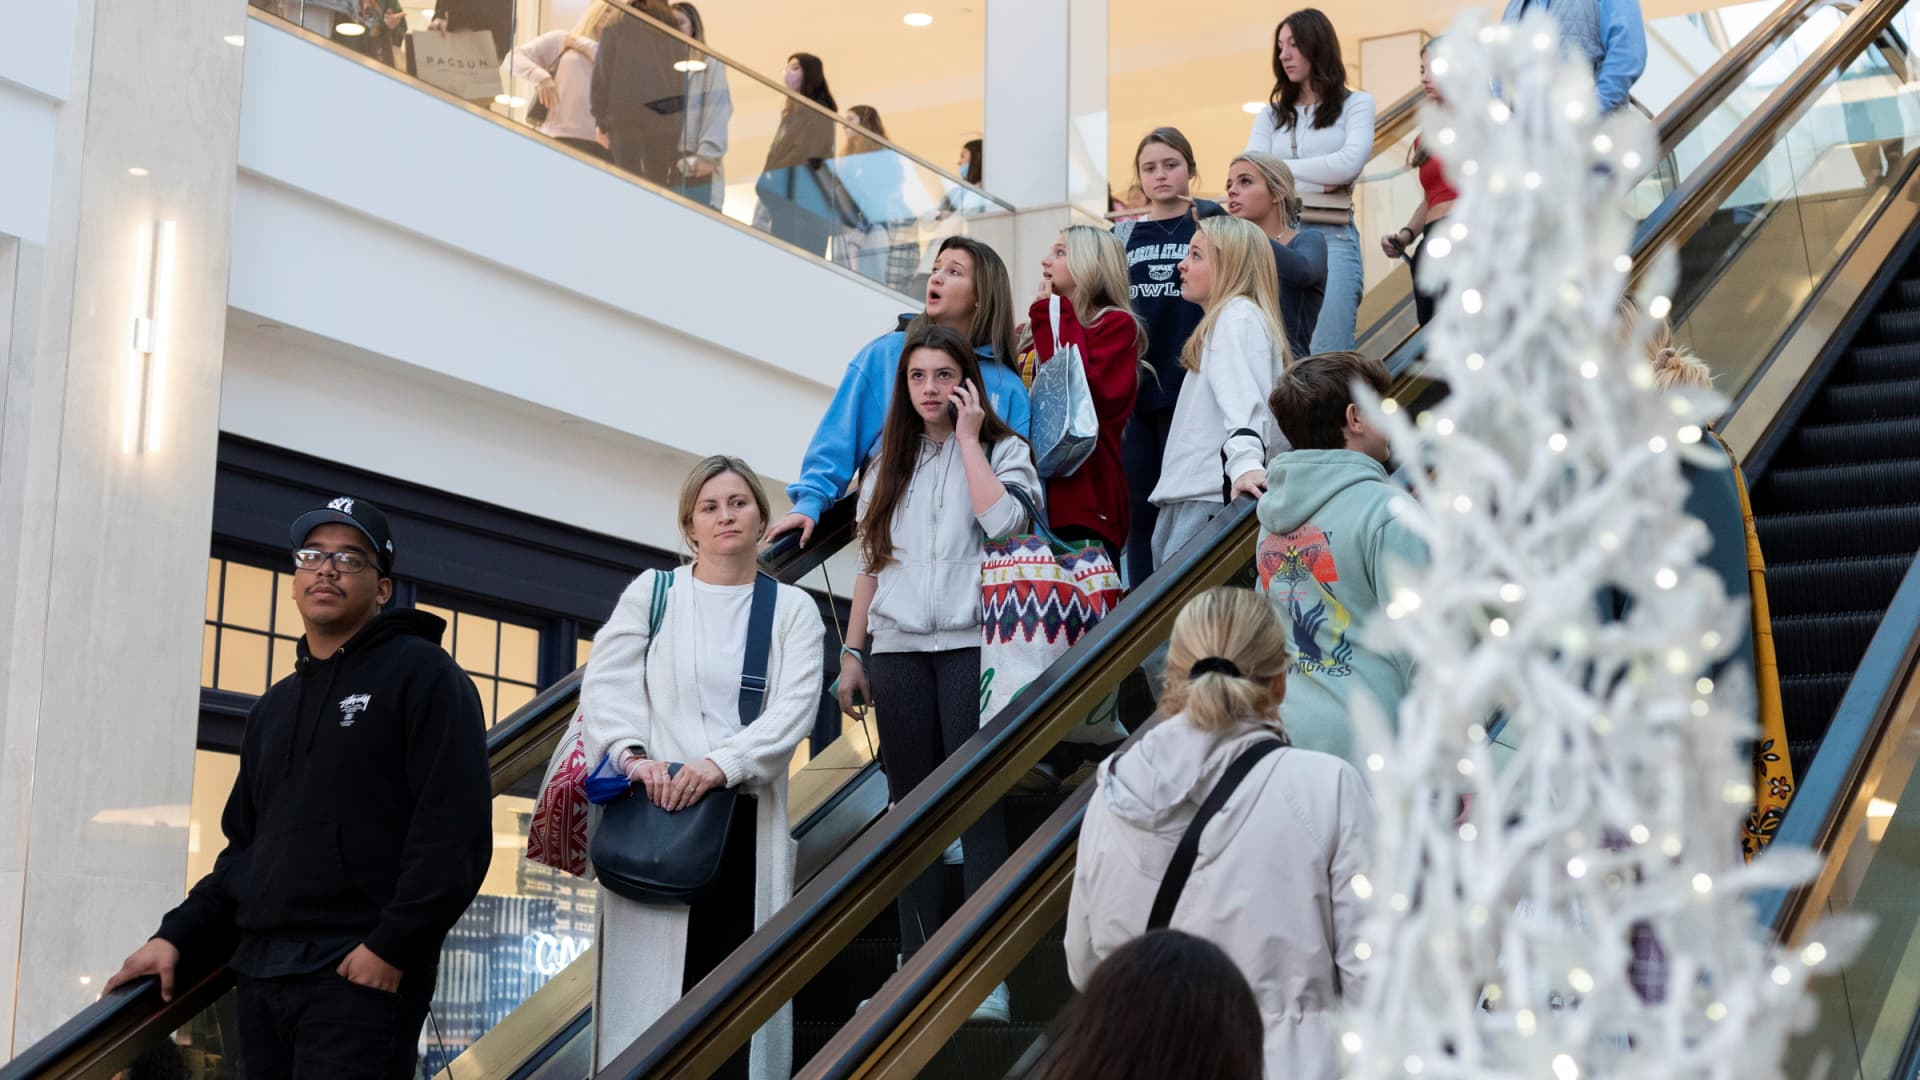 Holiday bargains will dent retail profits. How investors can avoid taking a beating